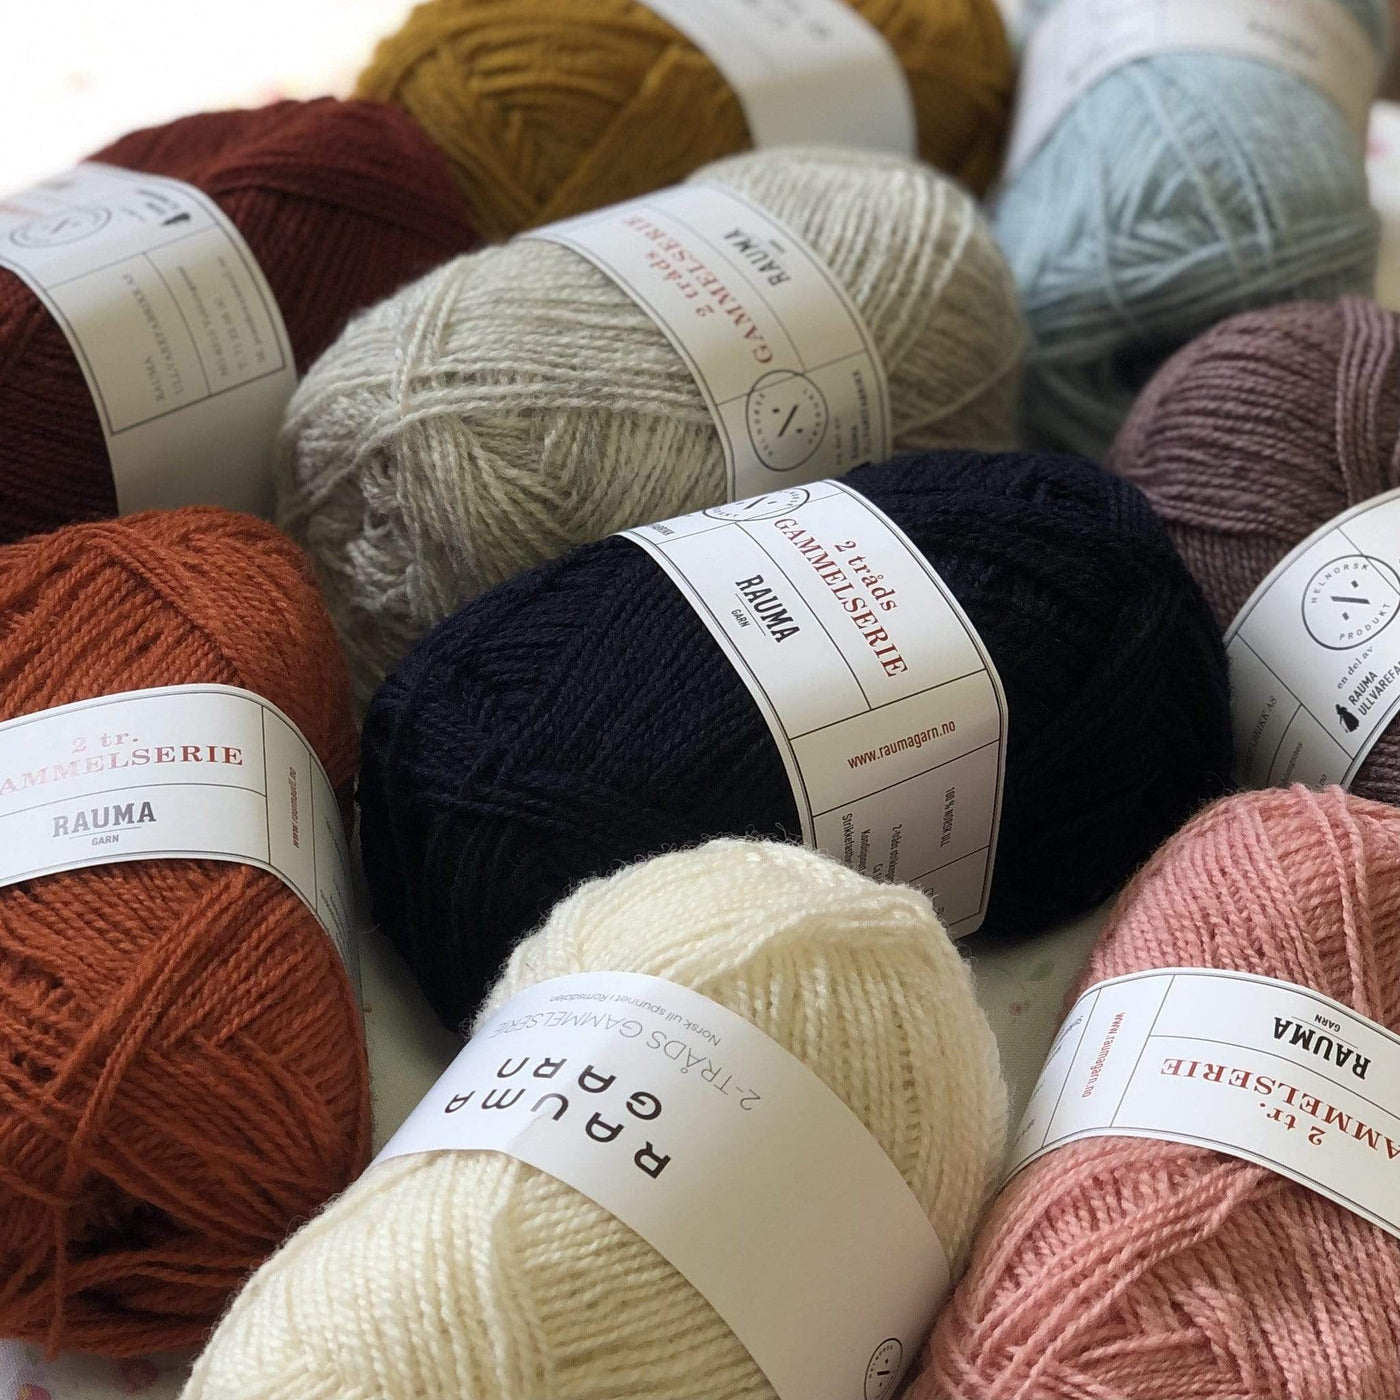 An assortment of skeins of Rauma Gammelserie on a table